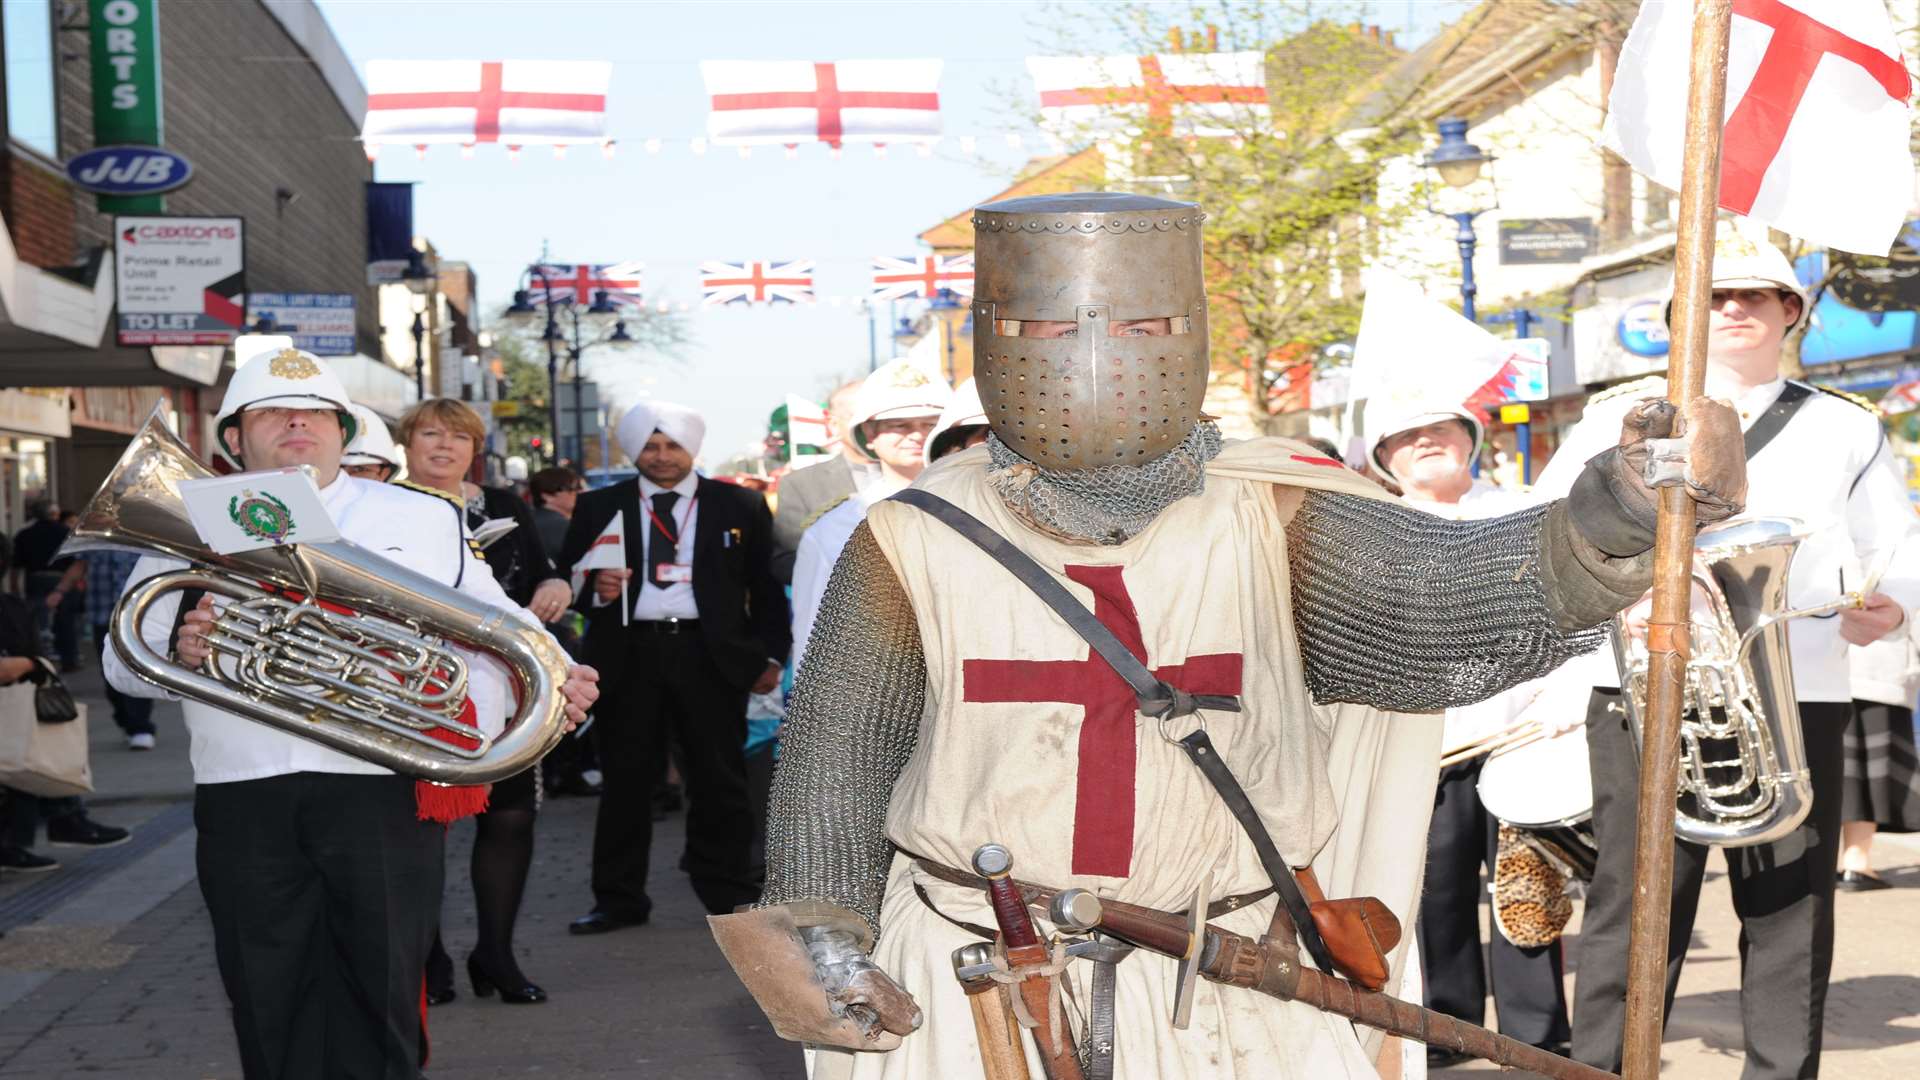 Parades will be going on for St George's Day this weekend